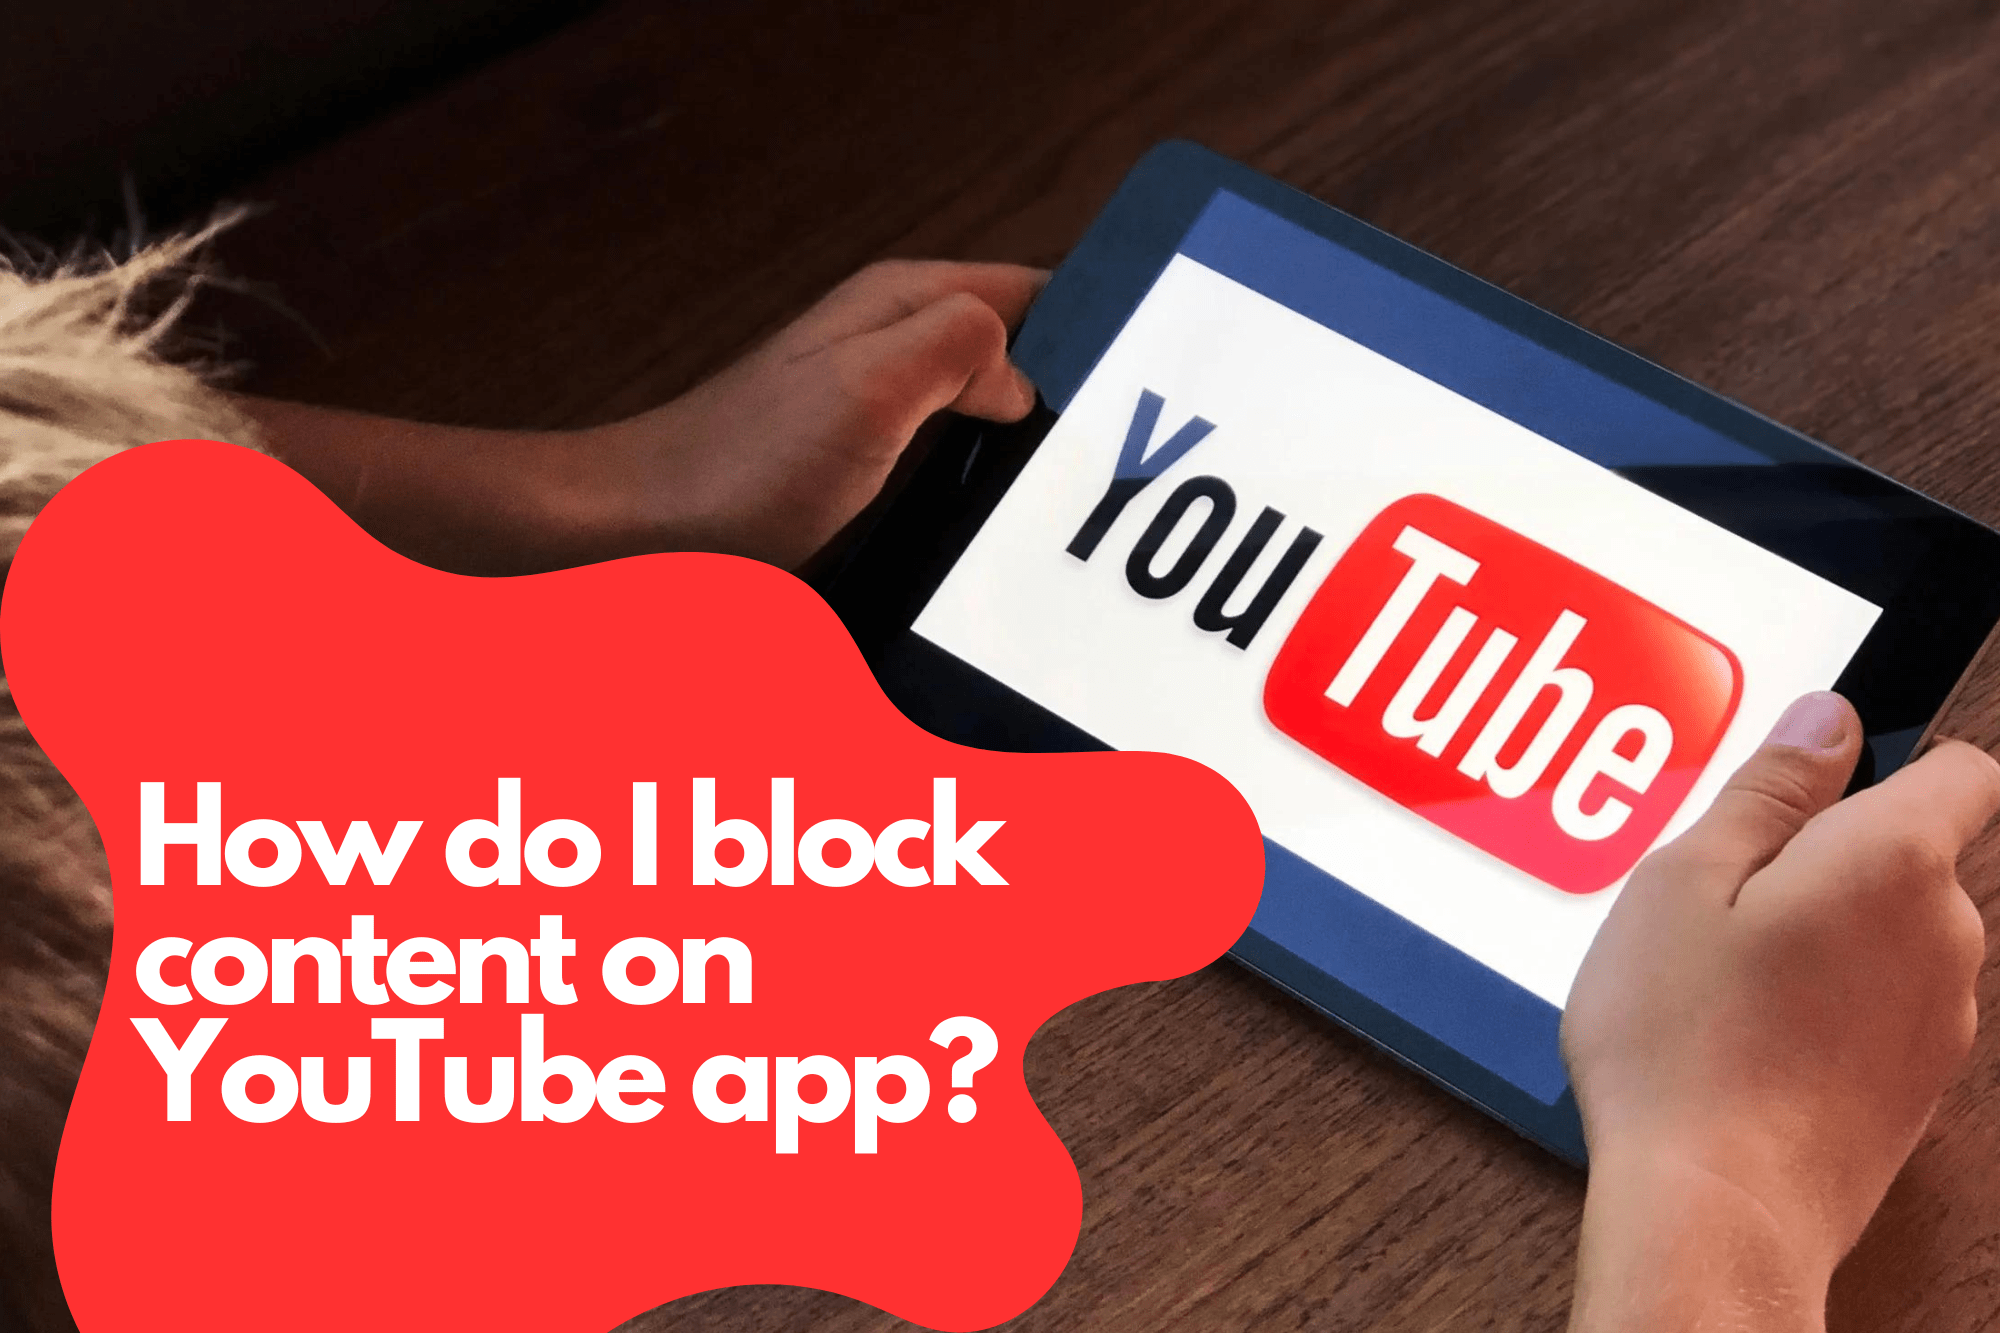 How do I block content on YouTube app?